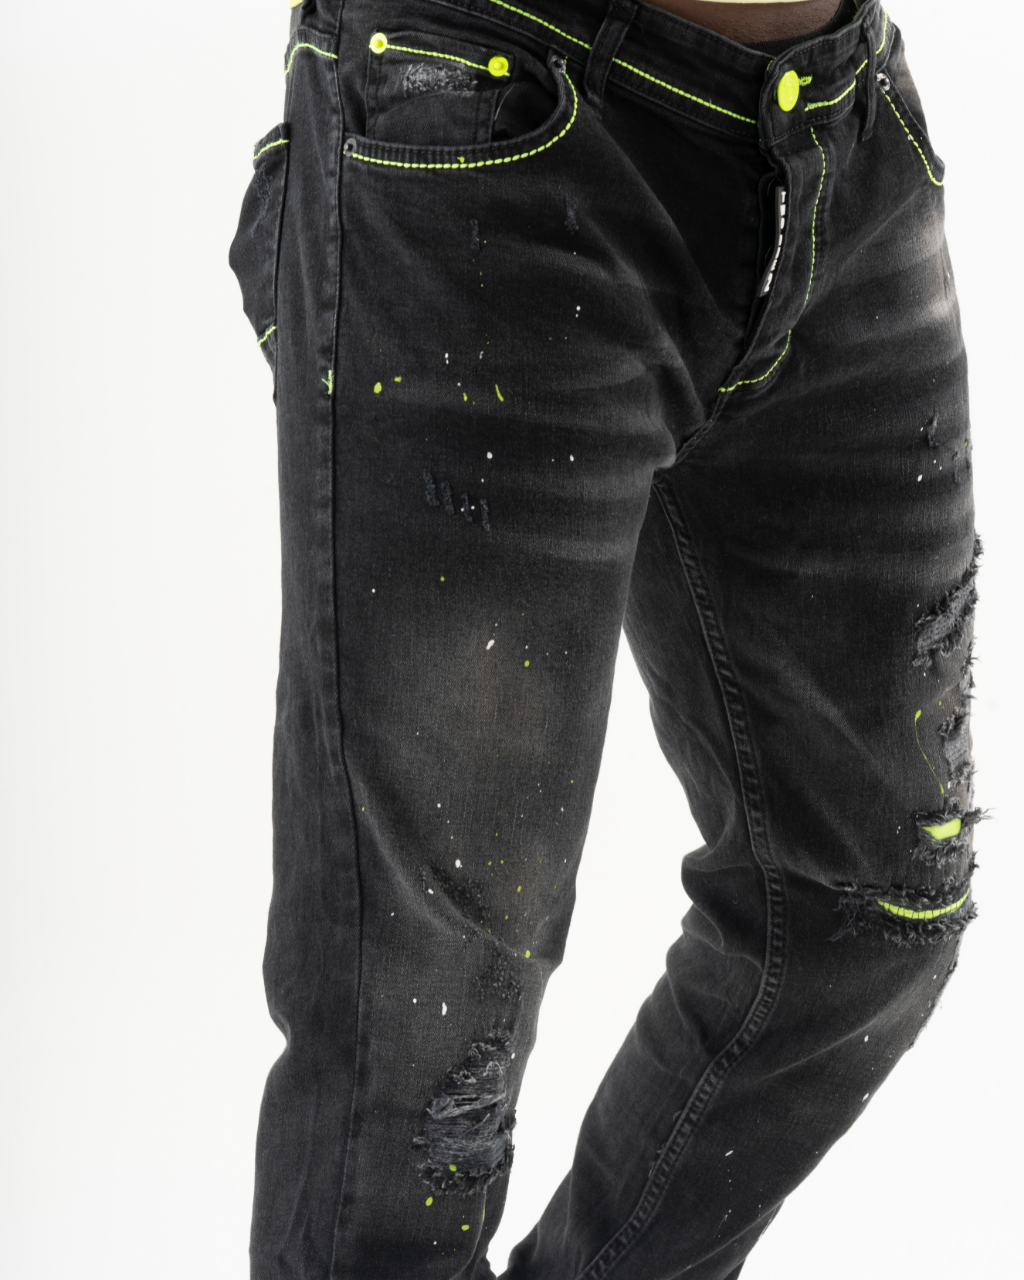 A man wearing a pair of TWILIGHT skinny fit black jeans with neon accents.